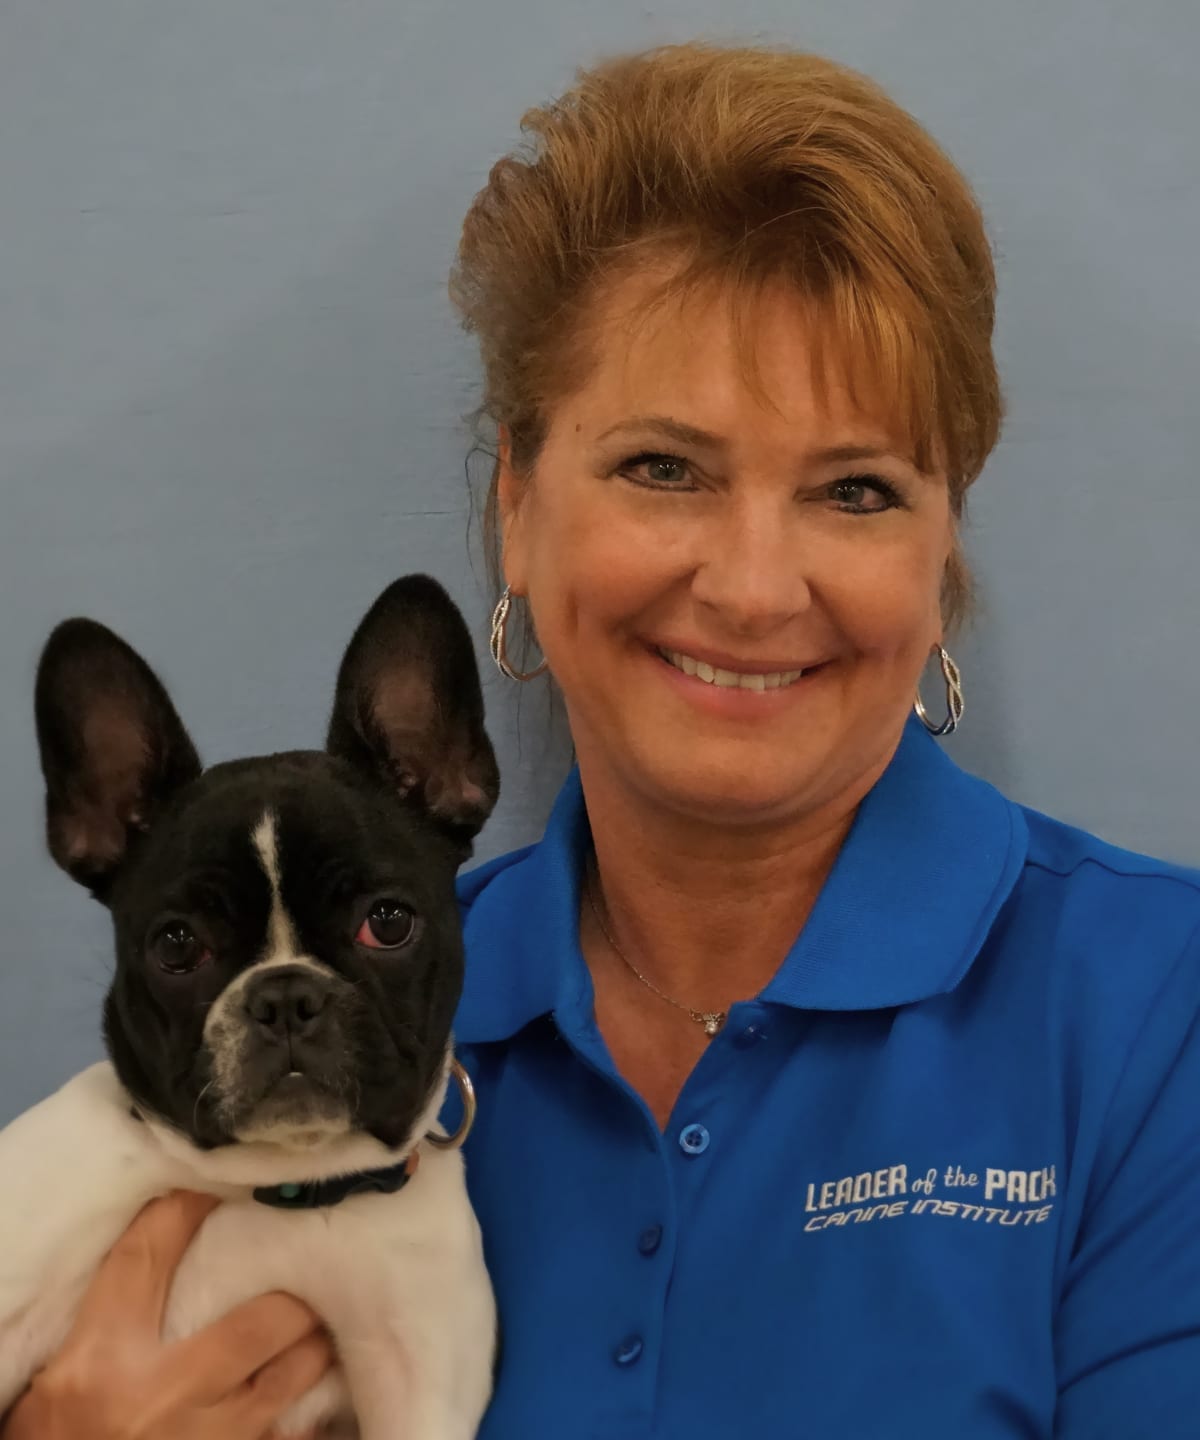 Lisa McDonald - Lead Dog Trainer at Leader of the Pack Canine Institute with black & white french bulldog